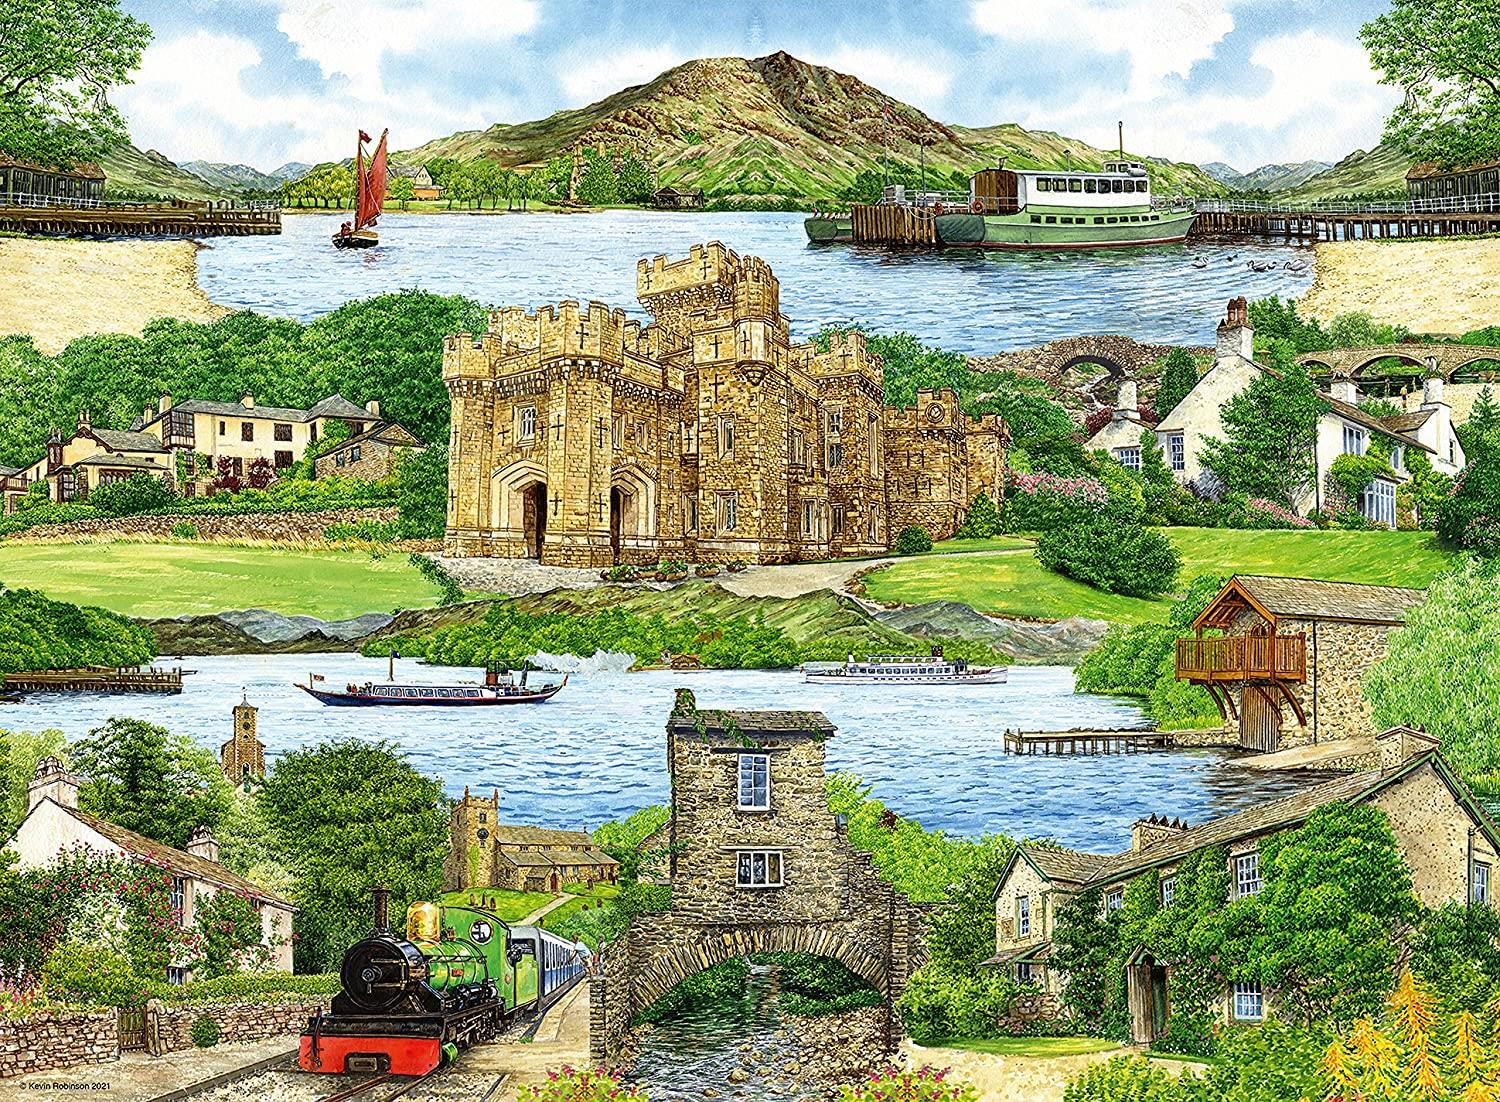 Ravensburger Escape to The Lake District Jigsaw Puzzle (500 Pieces)